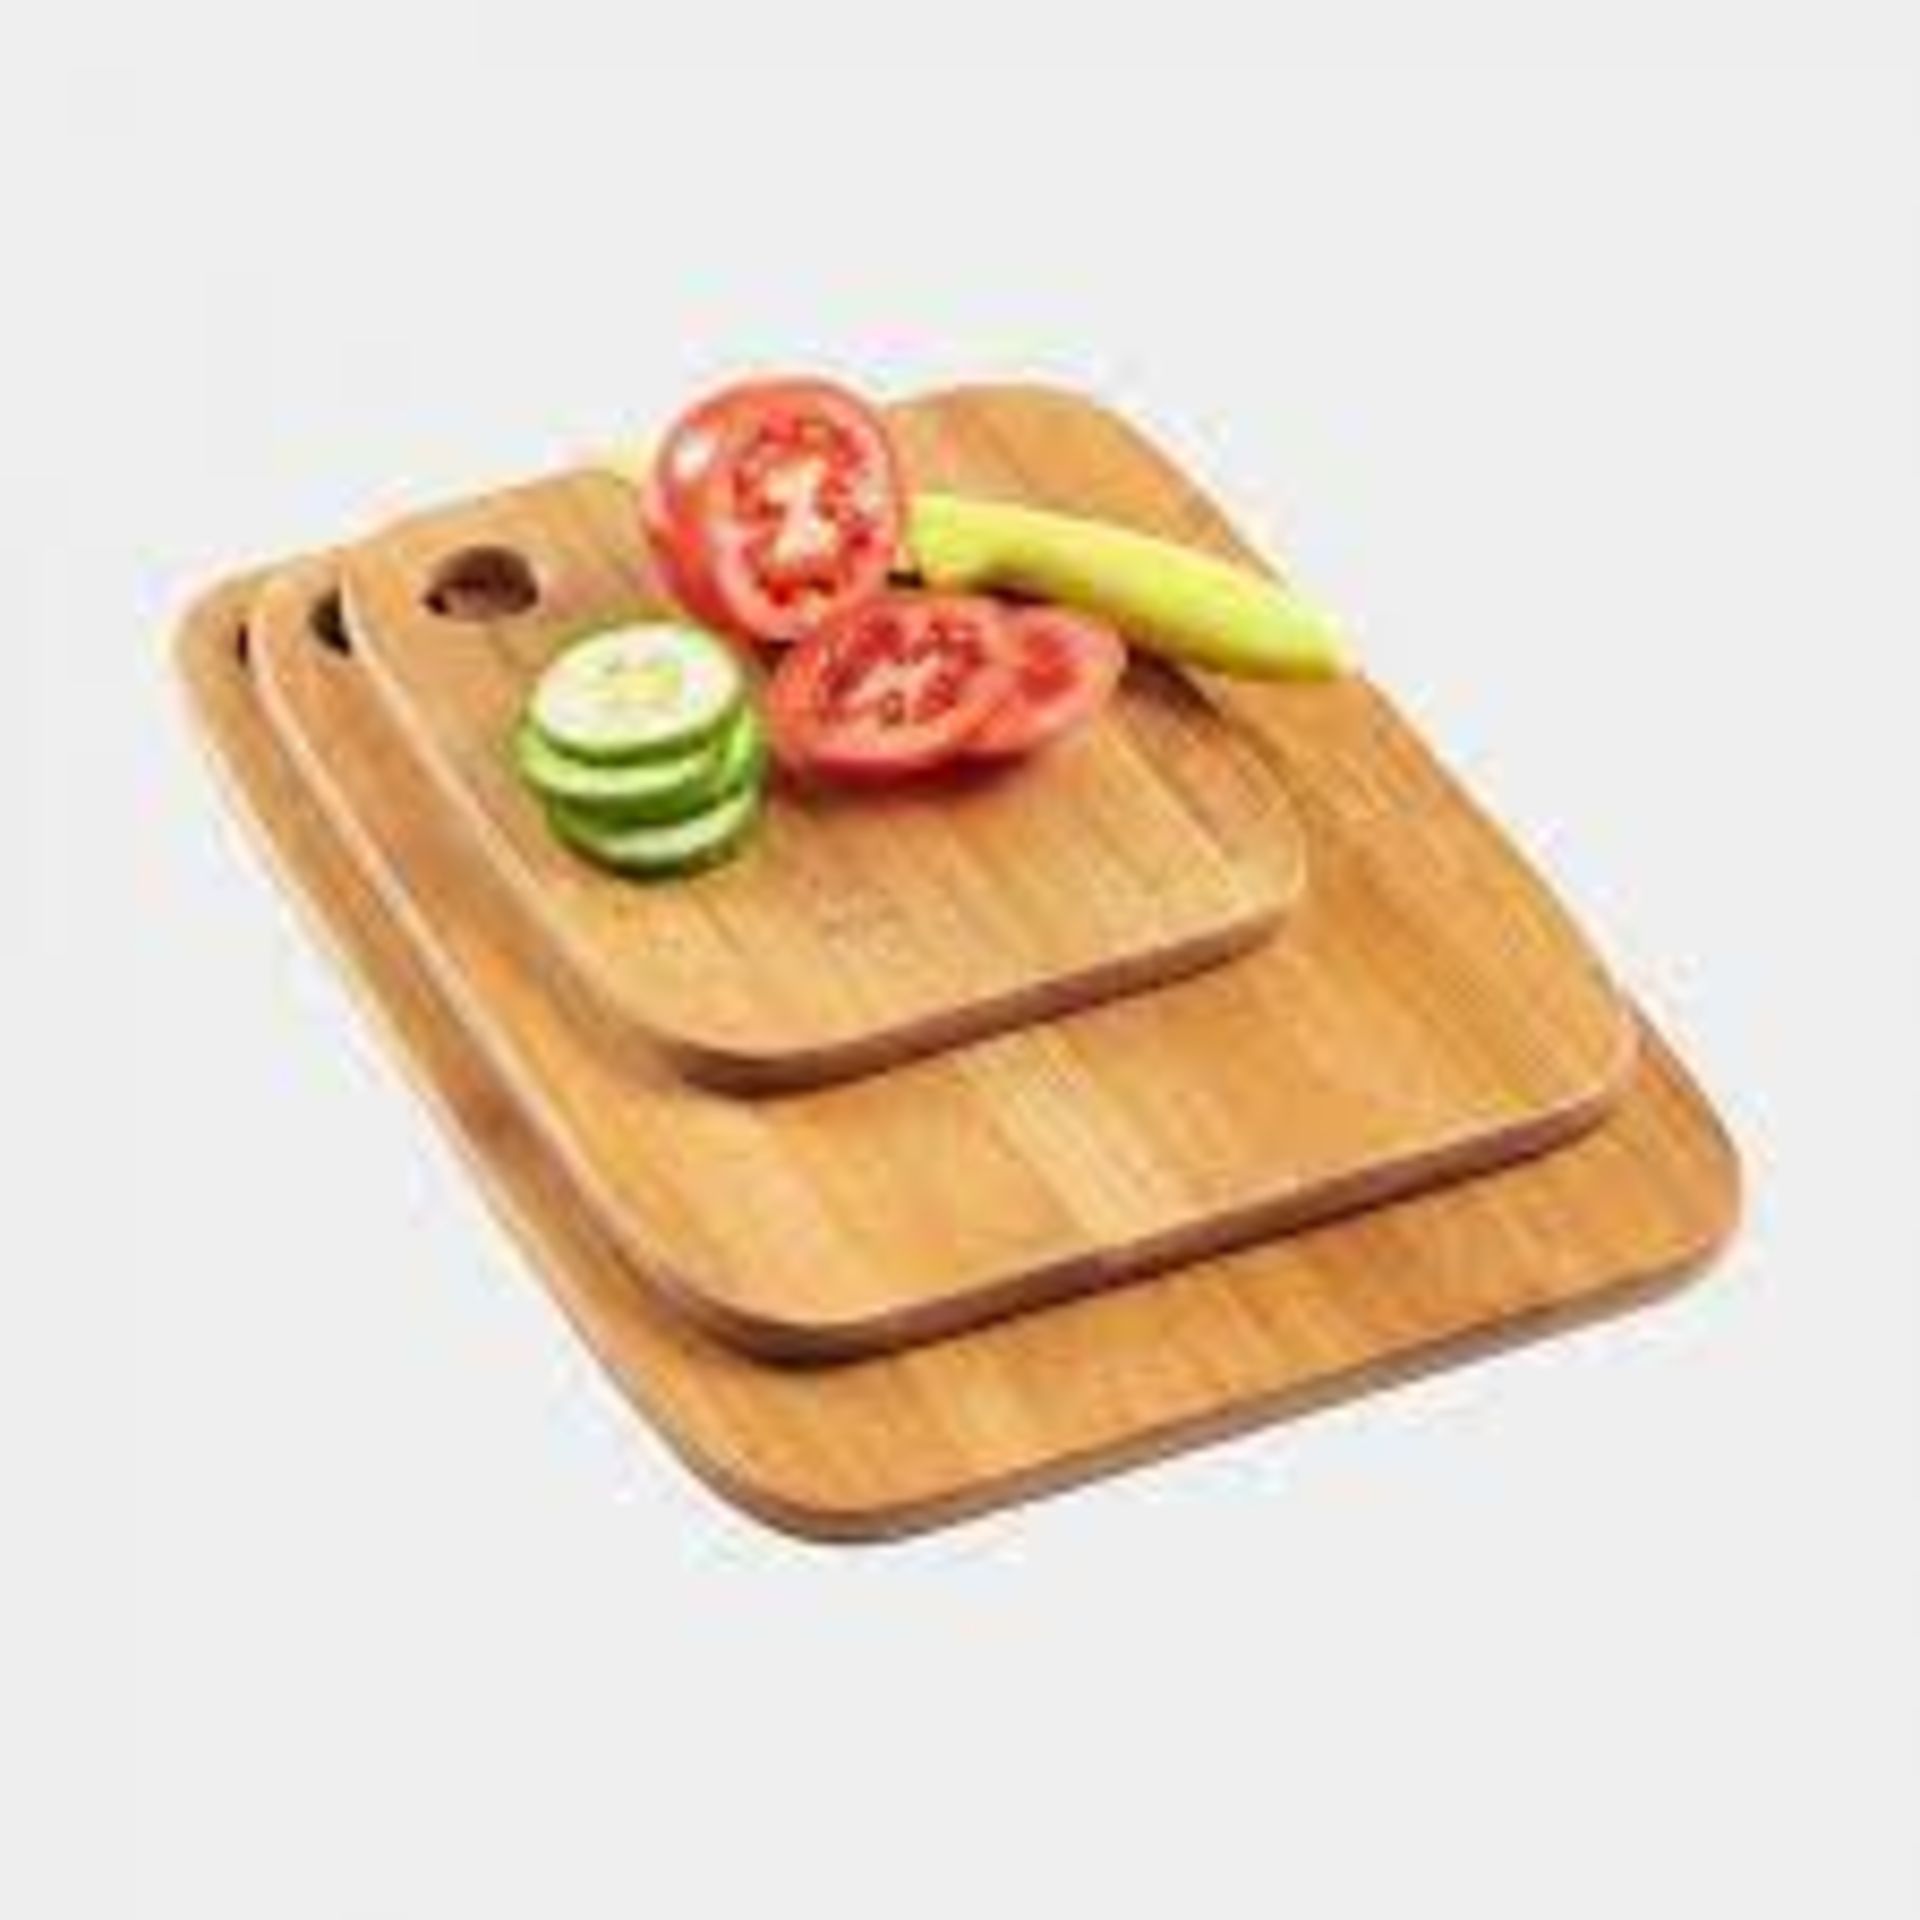 5 x New & Boxed VonChef 3 Piece Chopping Board Set (1000138). Cut, slice and dice to your heart's